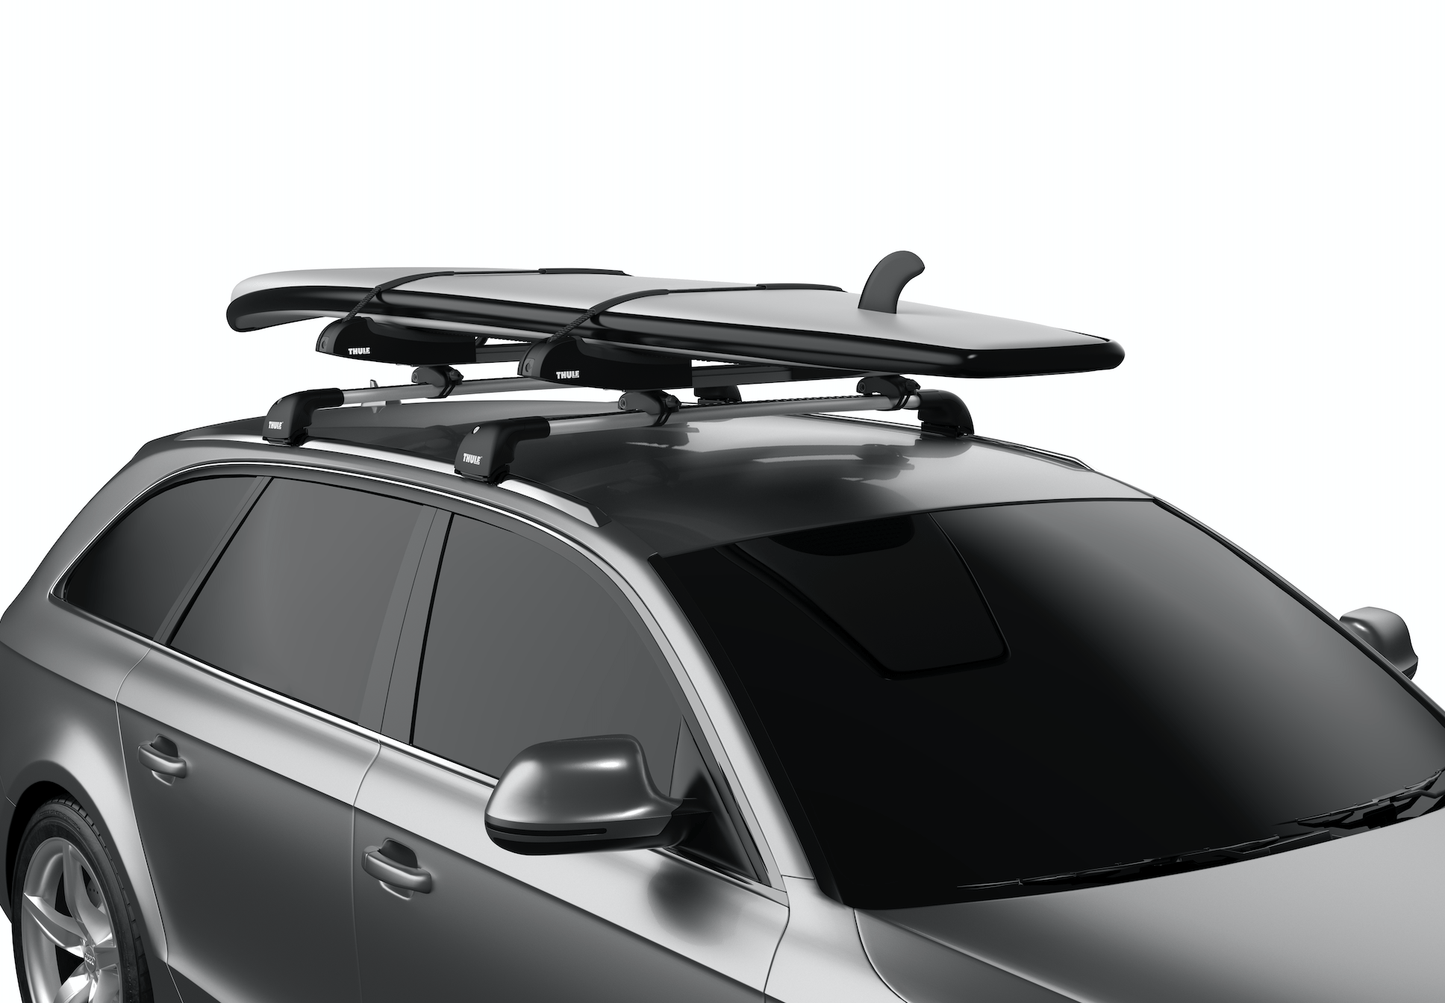 Thule SUP Taxi XT - Letang Auto Electrical Vehicle Parts